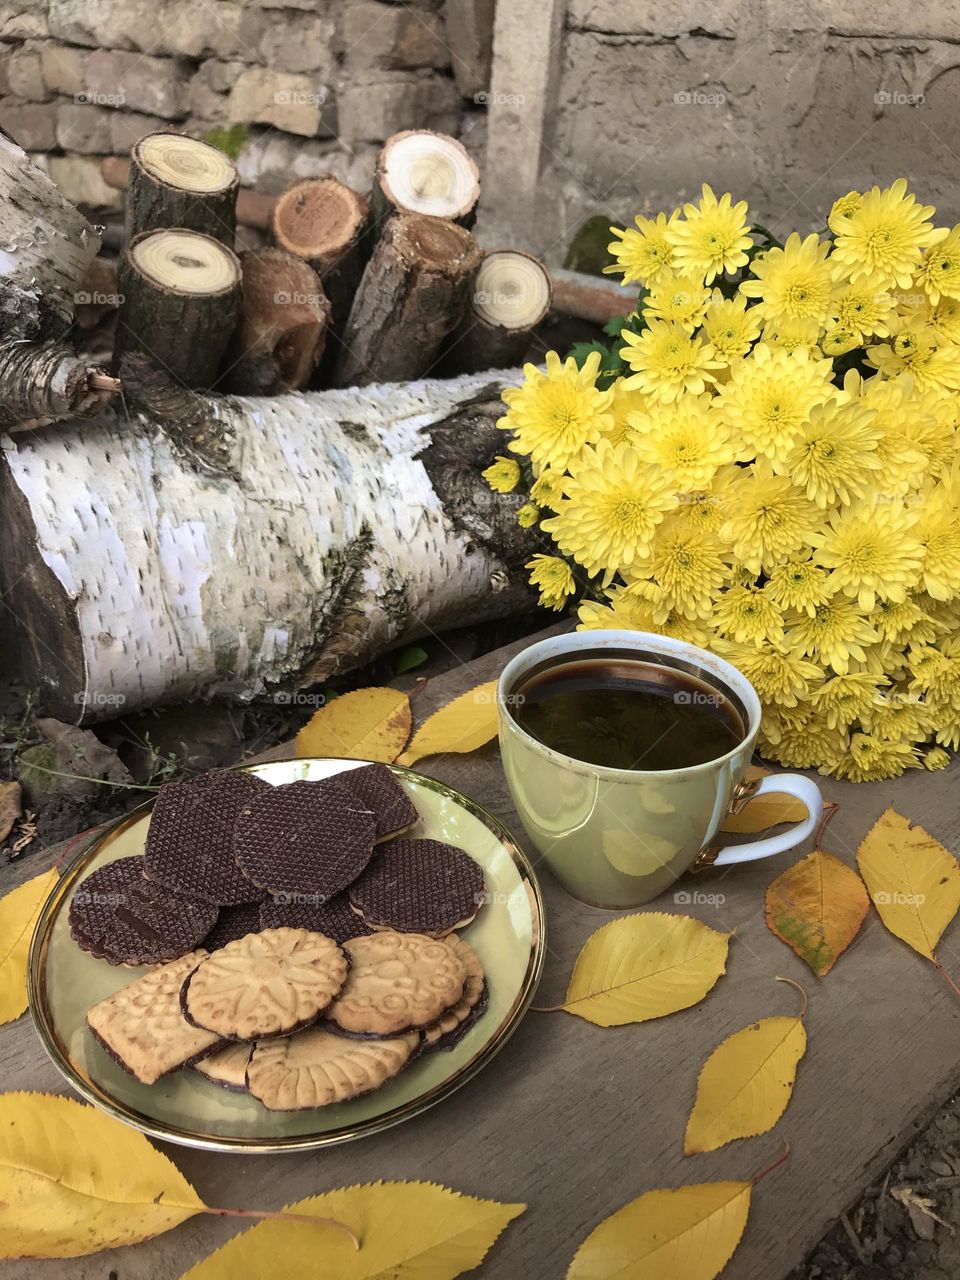 Coffee and some cookies in the fall